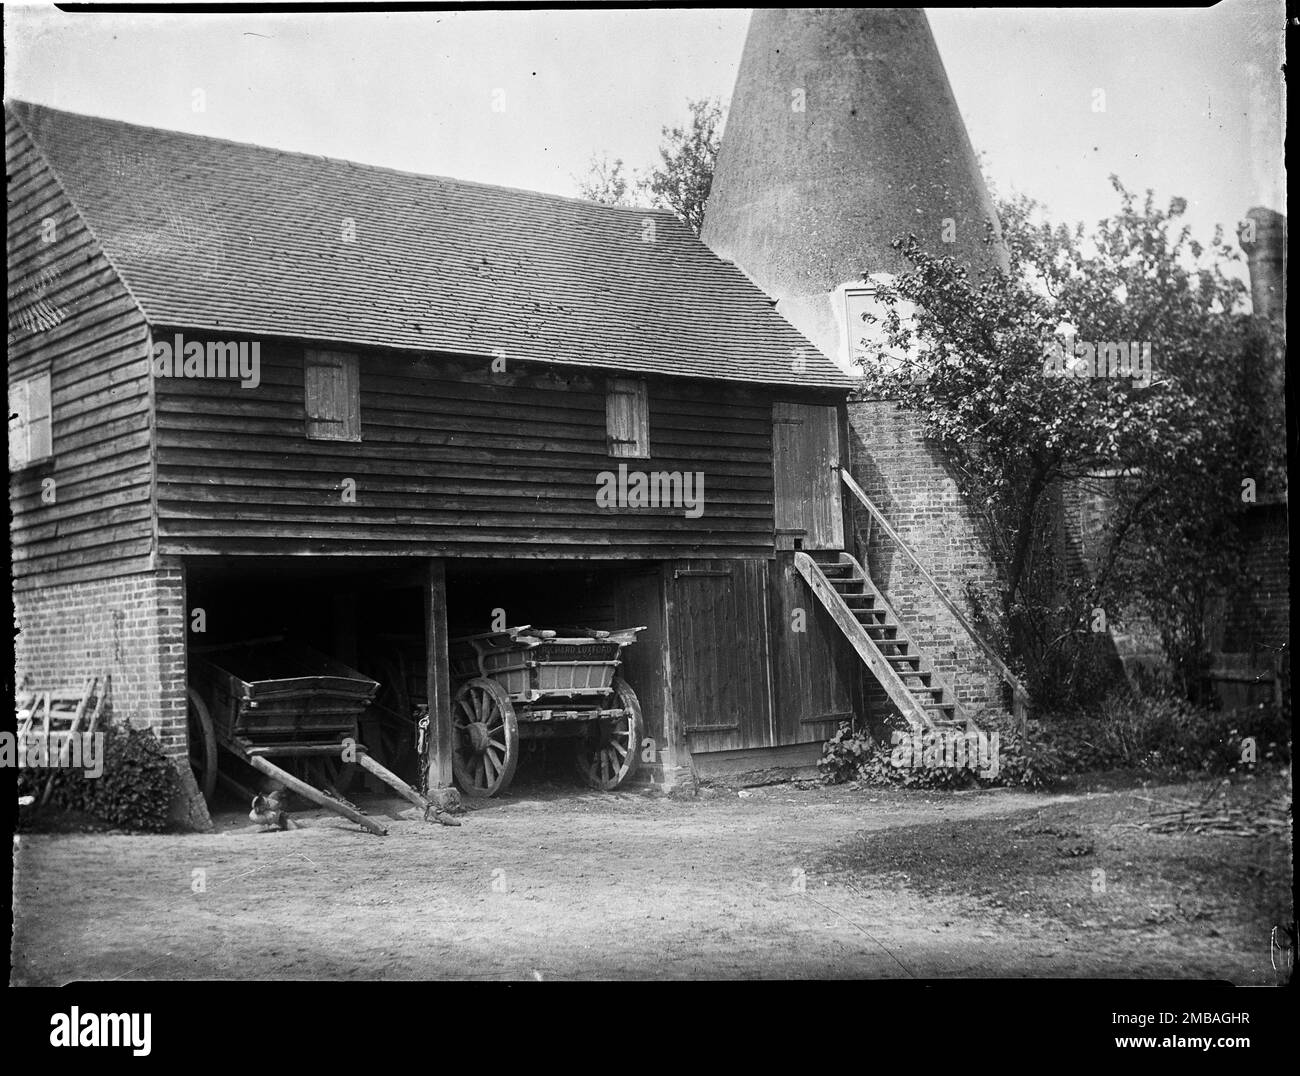 Florence Farm, Groombridge, Withyham, Wealden, East Sussex, 1911. An exterior view from the south-east of the oasthouse and stowage barn at Florence Farm, with two carts in the cart shed on the ground floor of the barn. Stock Photo